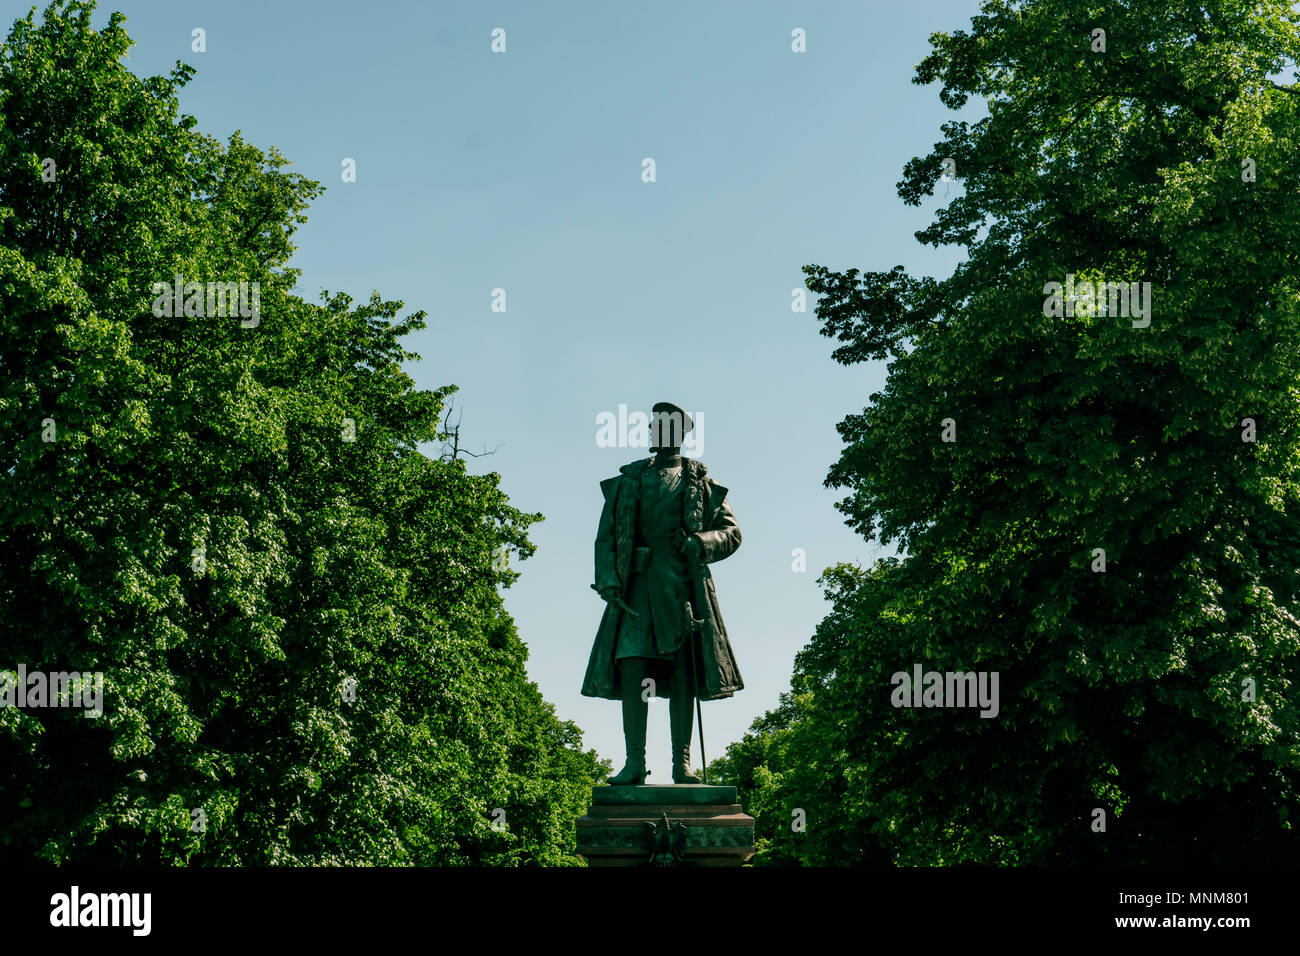 Berlin, Germany, May 14, 2018: Statue of Albrecht Prince of Prussia opposite Charlottenburg Palace Stock Photo